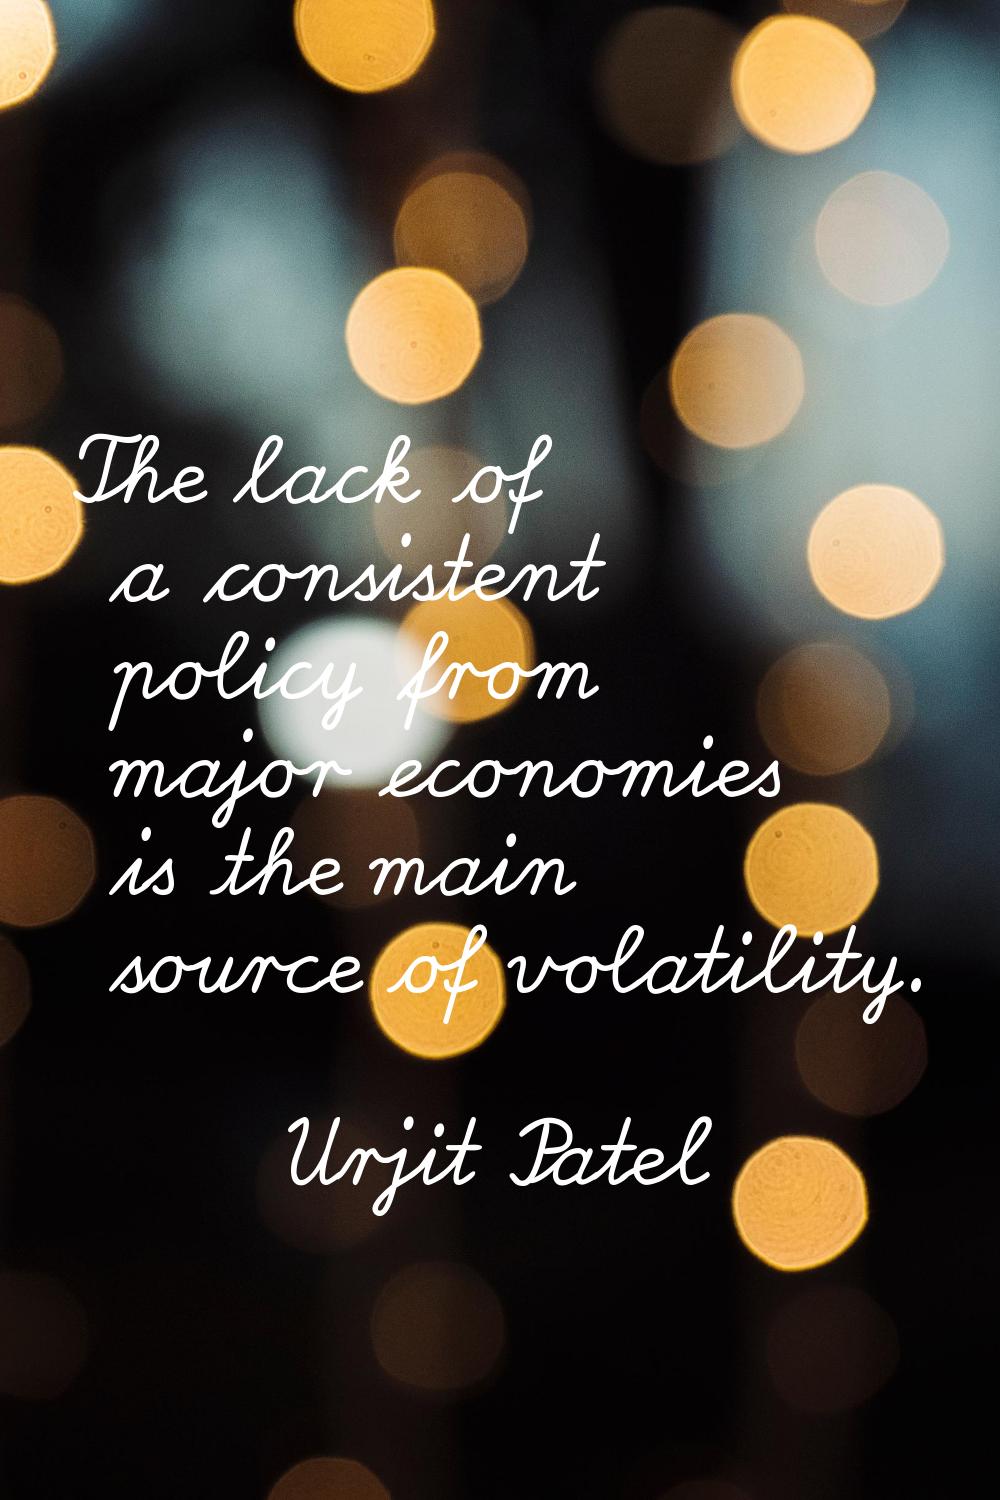 The lack of a consistent policy from major economies is the main source of volatility.